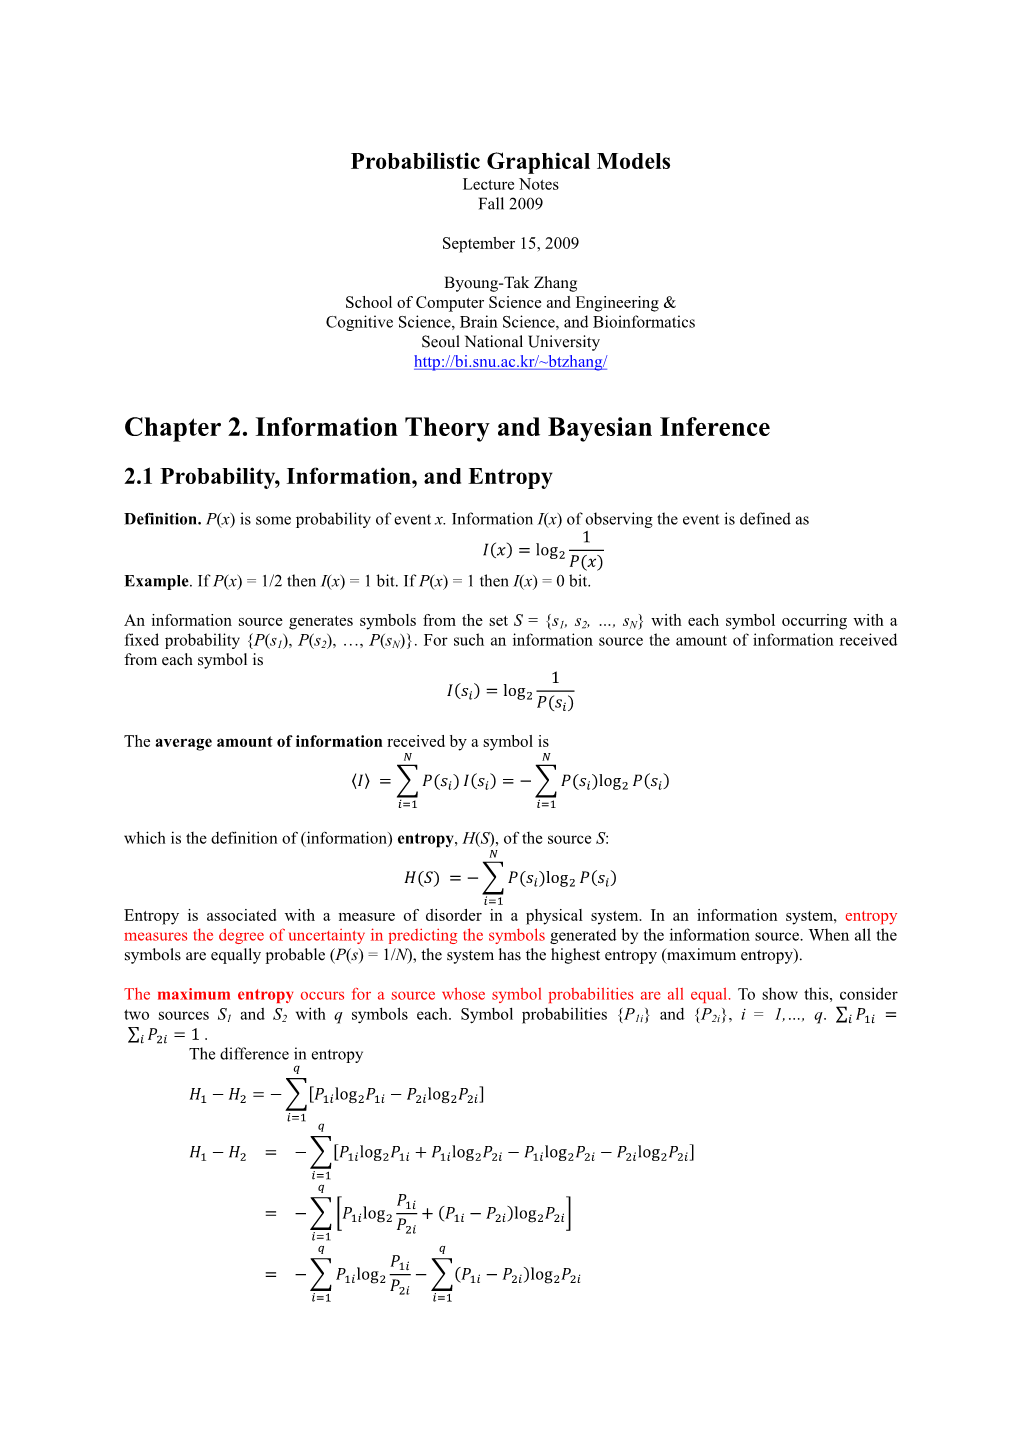 Chapter 2. Information Theory and Bayesian Inference